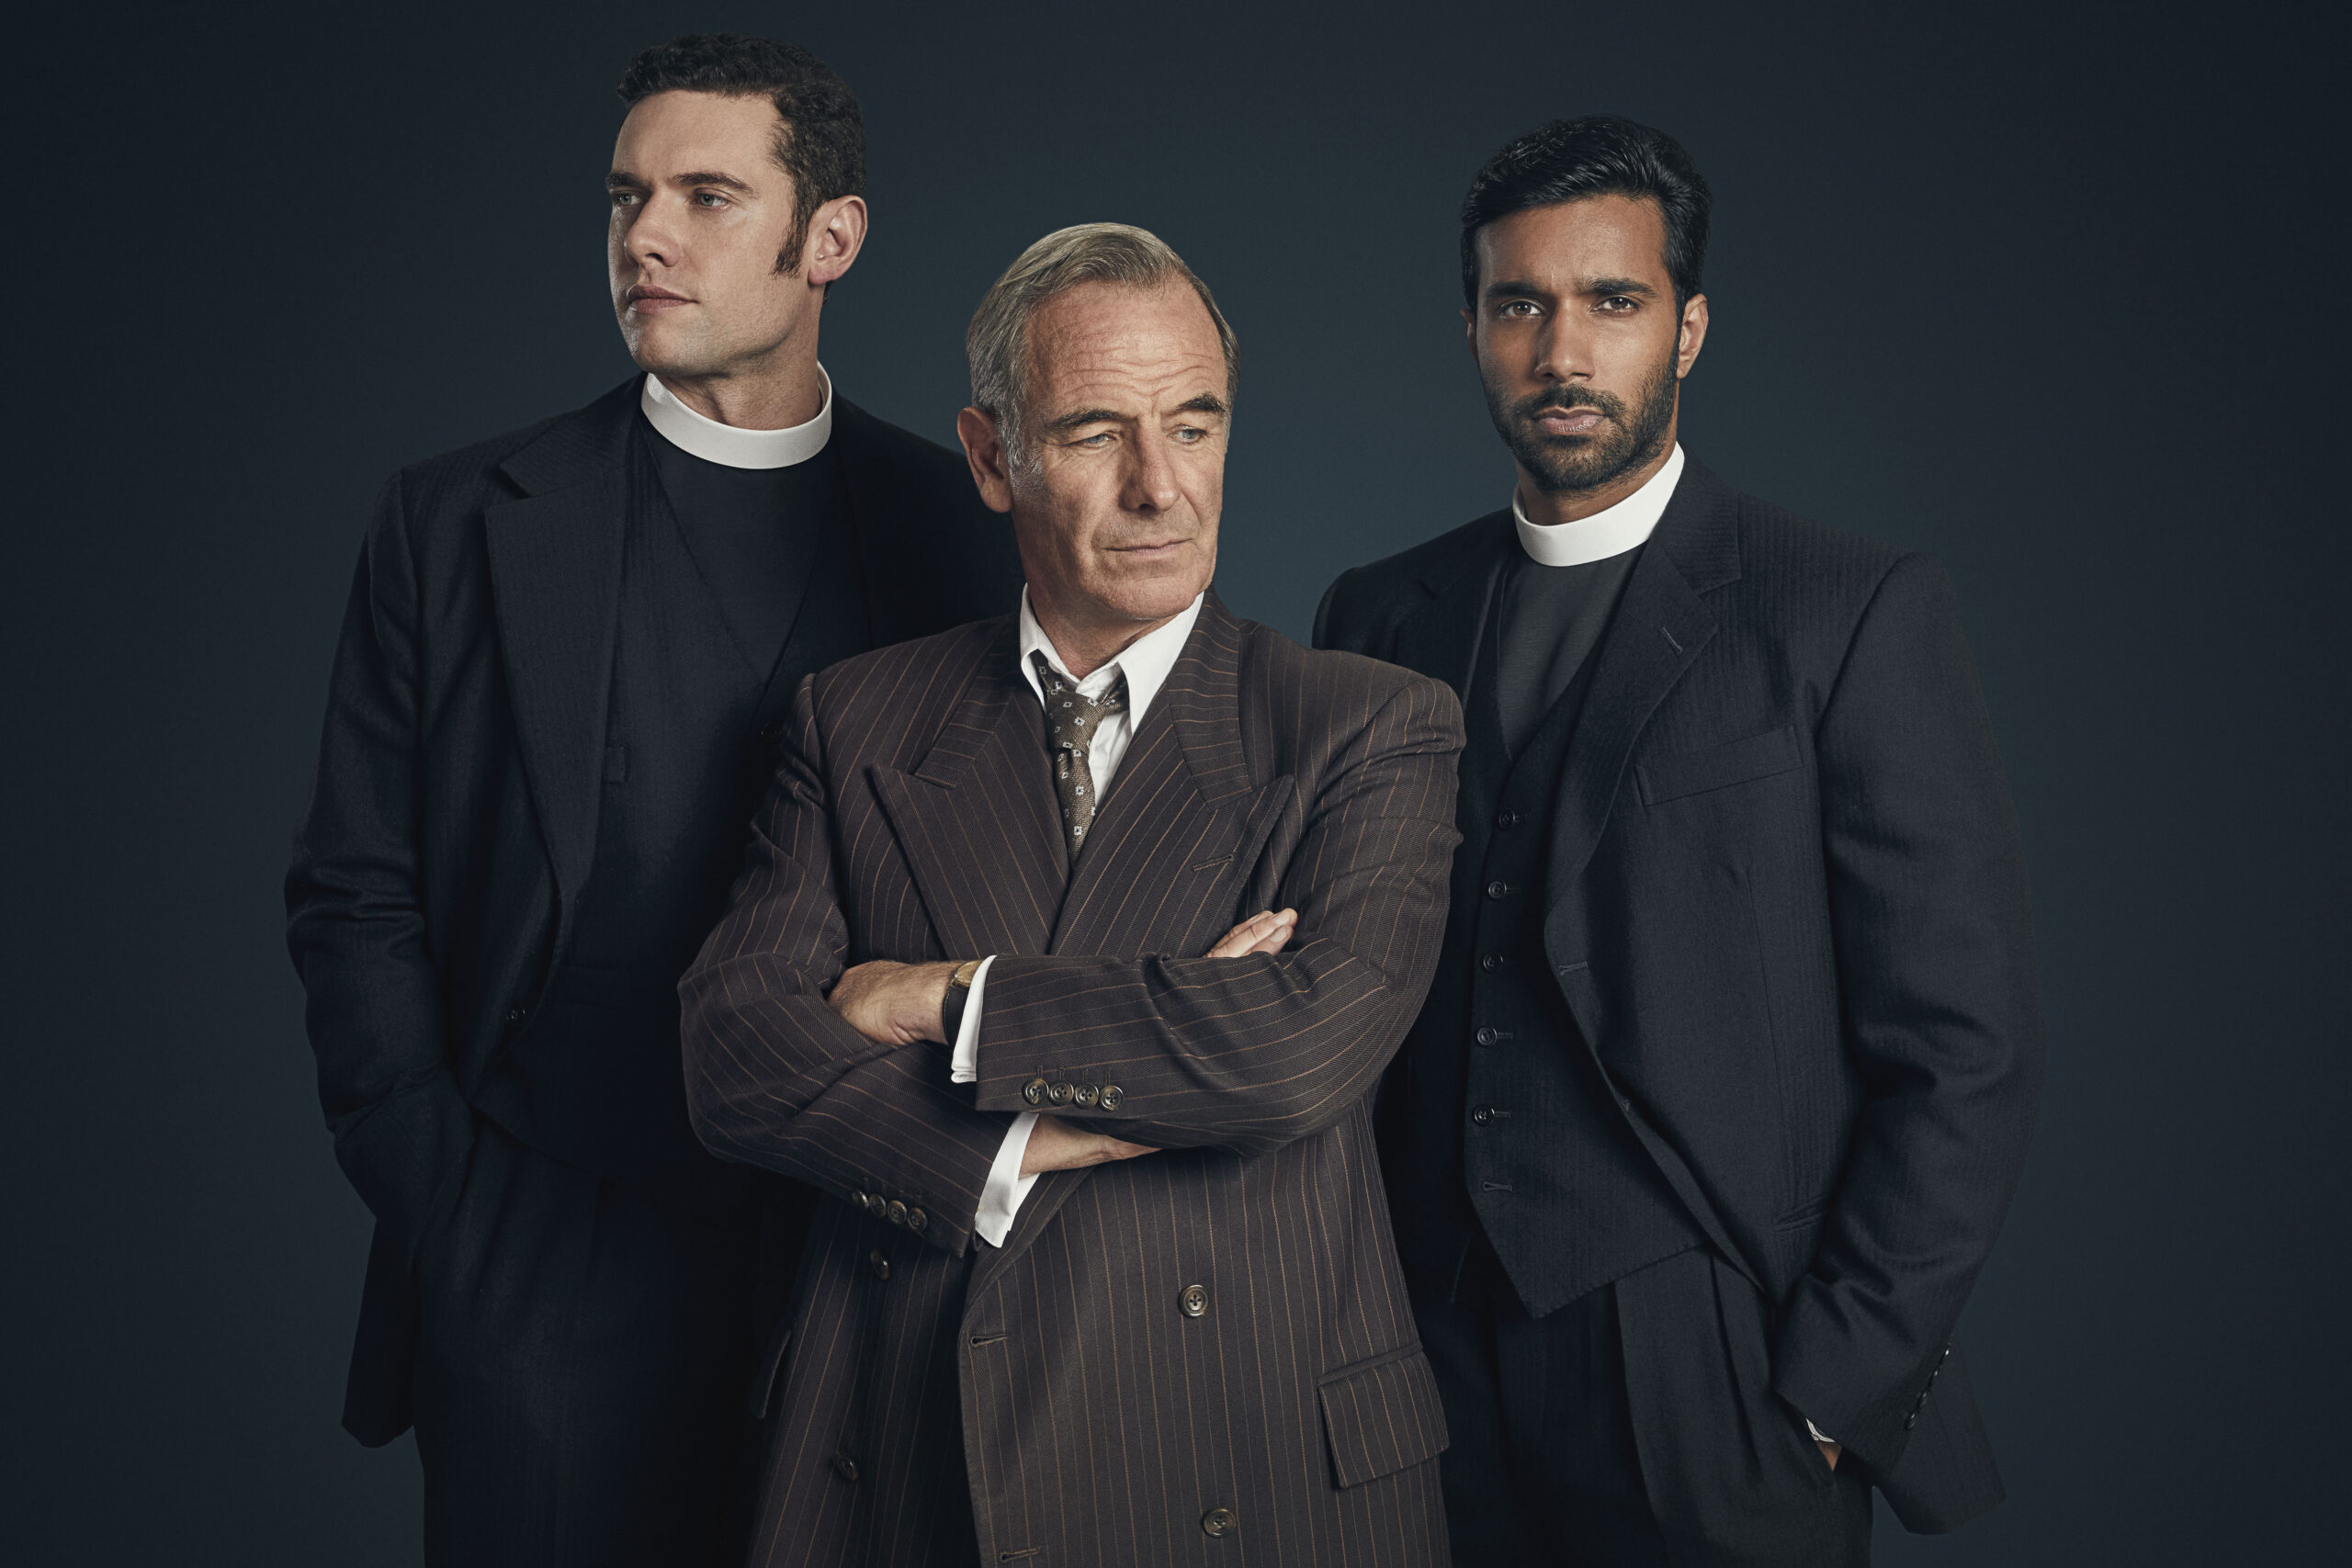 Three men stand together - the middle man wearing a dark suit, tie and white collared shirt. The men on each side of him are wearing vicar collars.